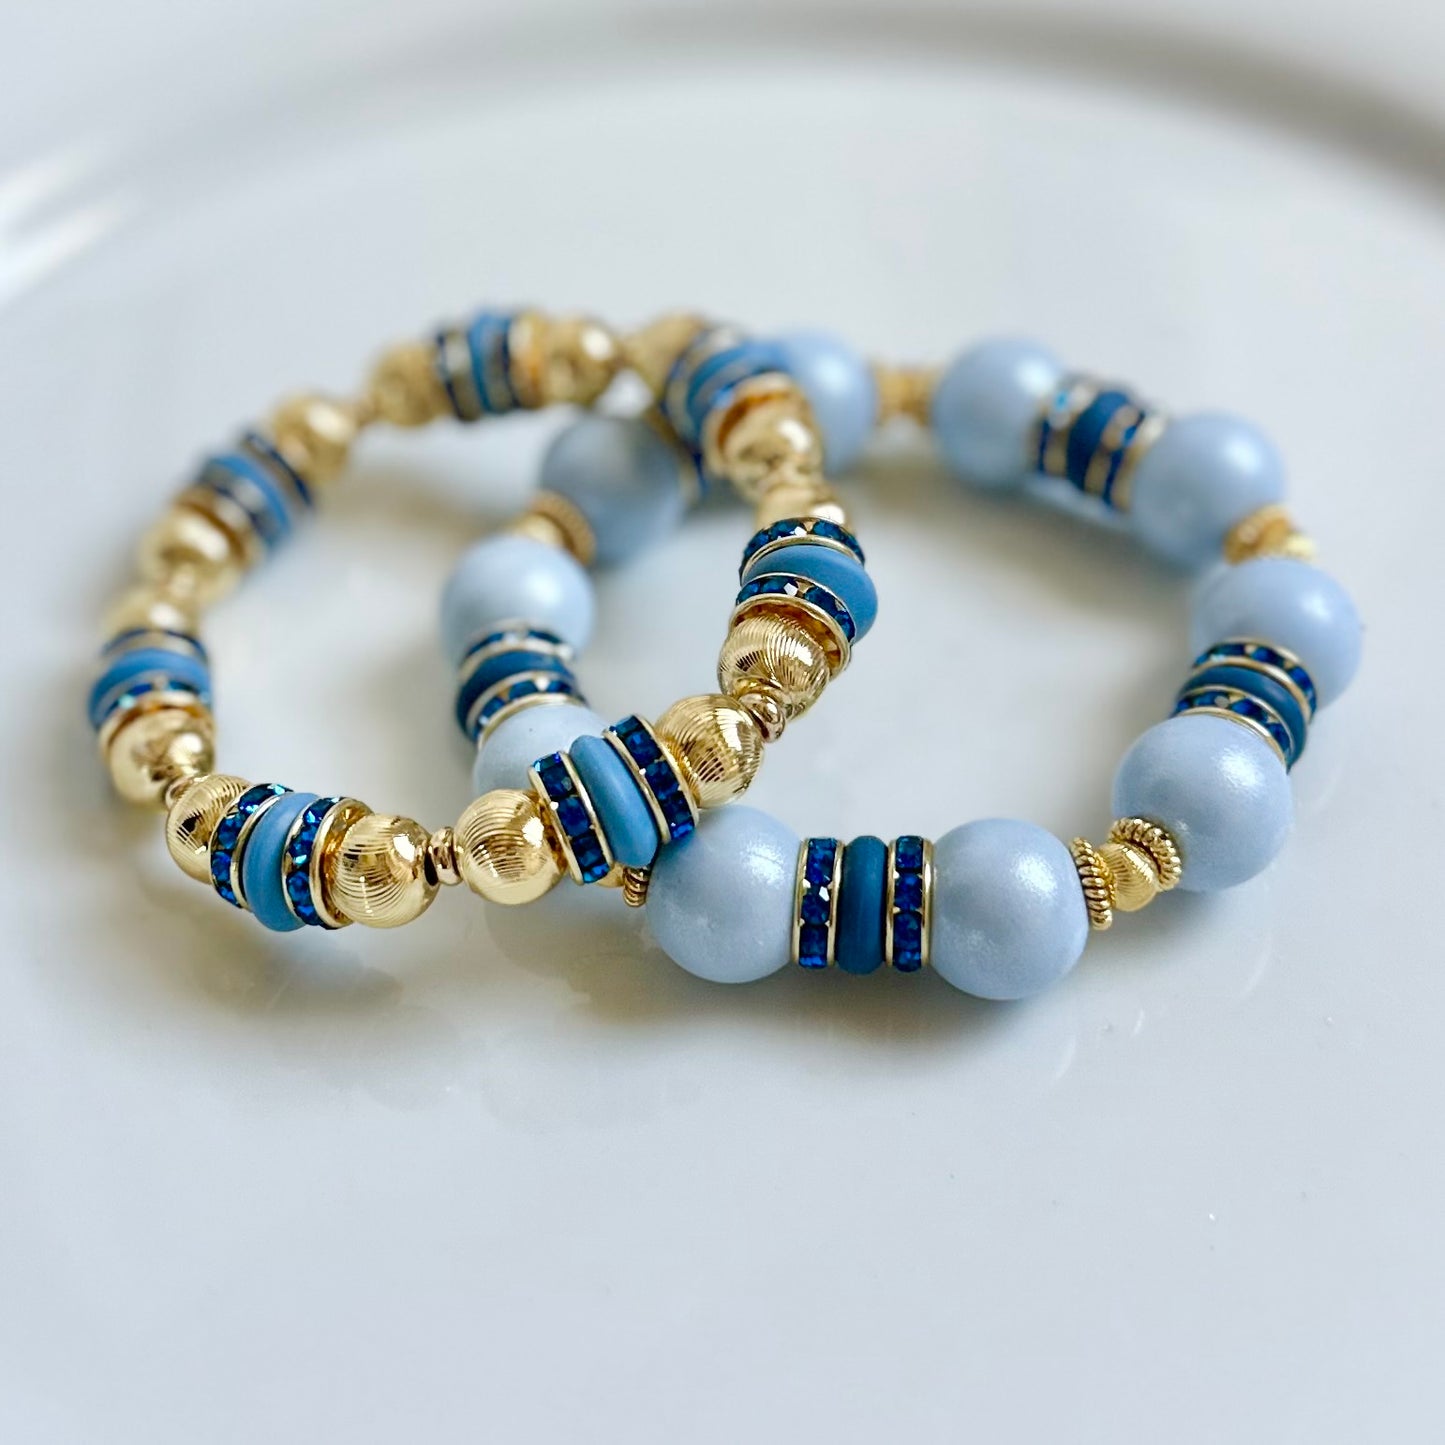 GOLD AND BLUE BRACELET WITH CZ ACCENTS